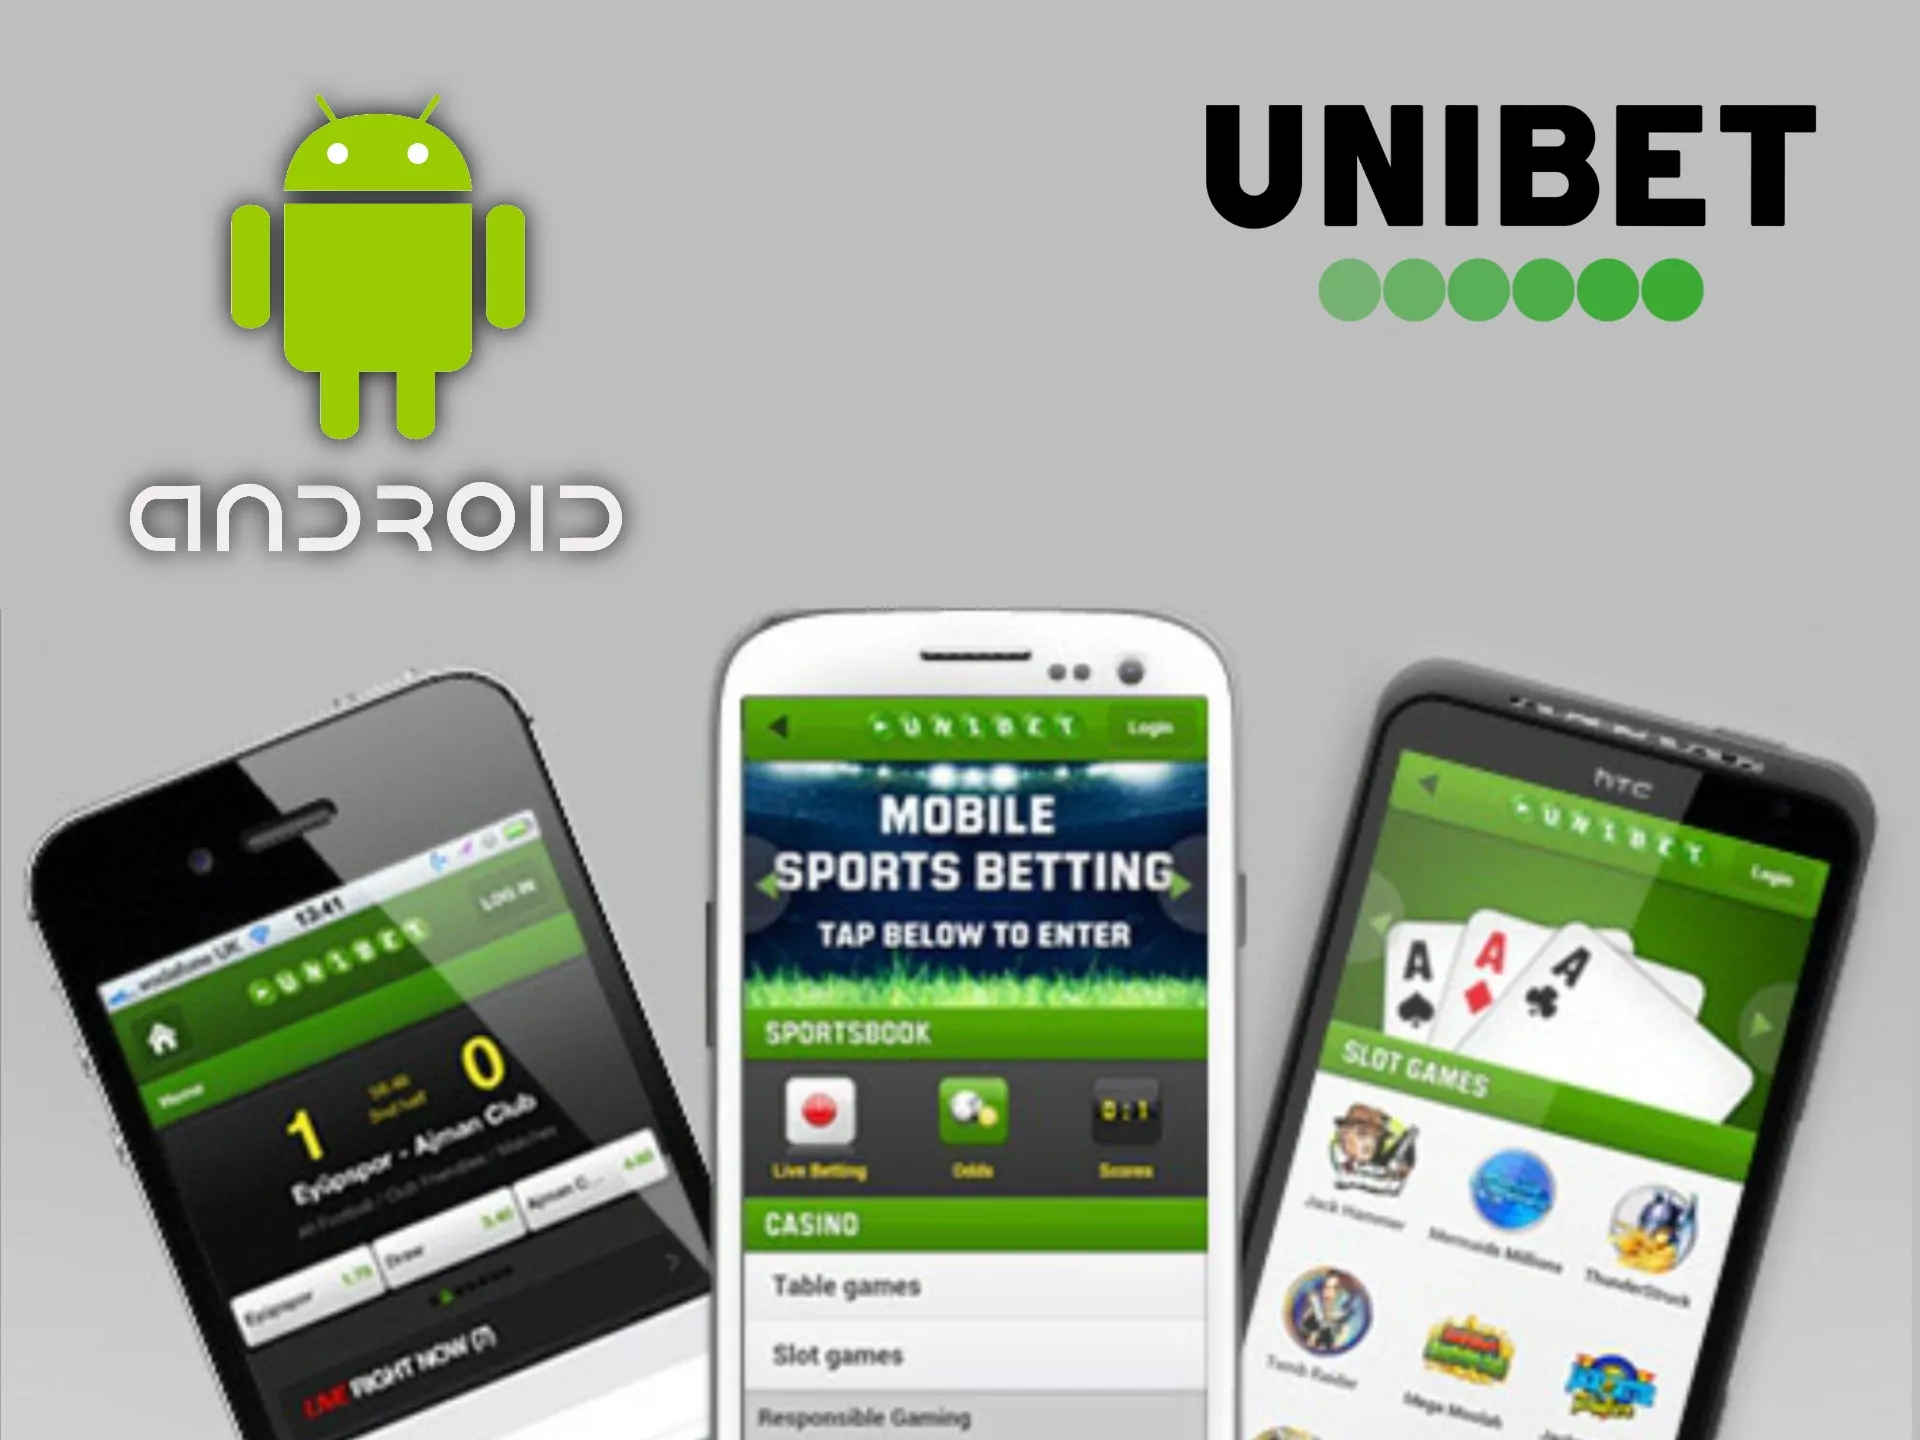 Unibet Android app has a lot of fuctions for convenient betting on cricket.